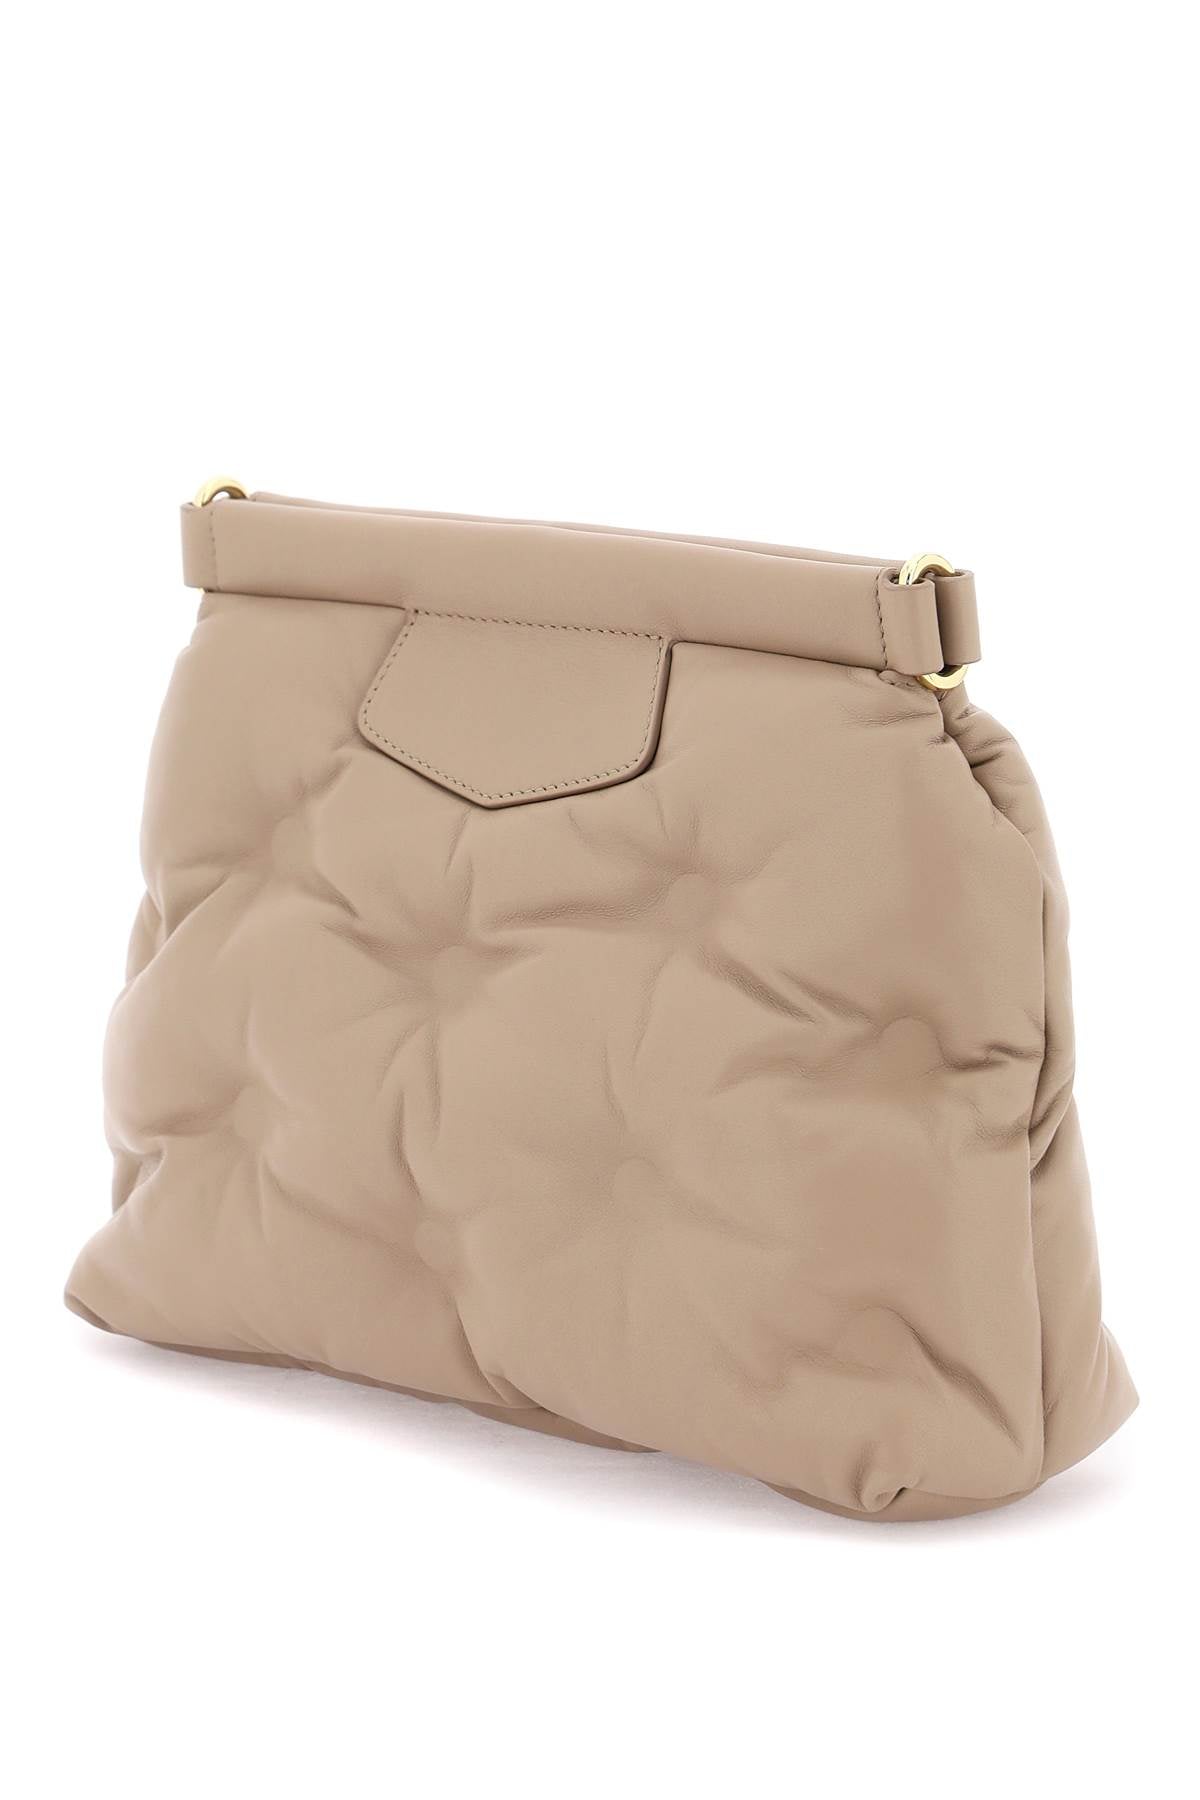 Quilted Padded Soft Leather Crossbody Handbag in Beige